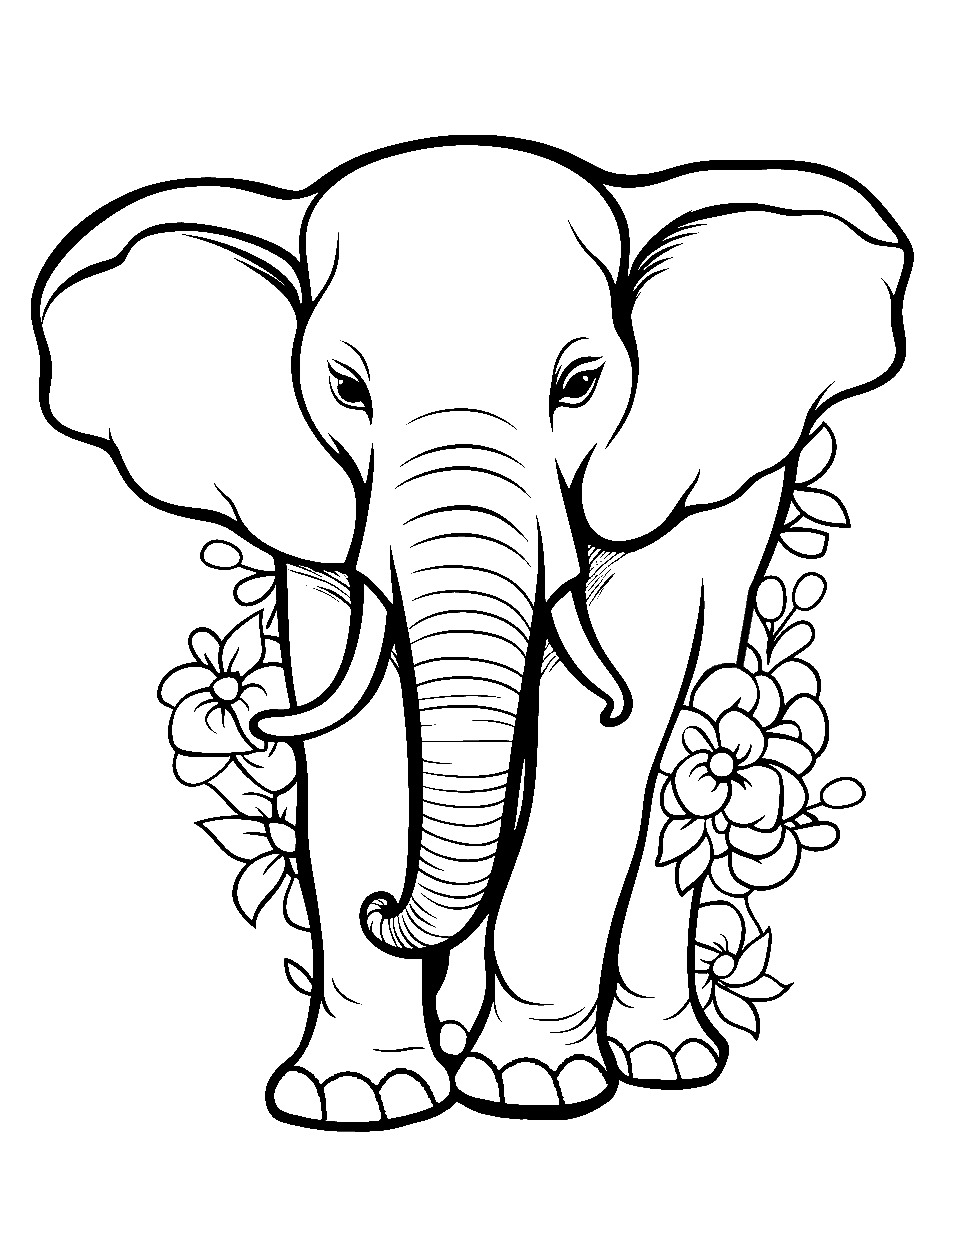 Pretty Elephant with Flowers Coloring Page - An elephant adorned with beautiful flowers.